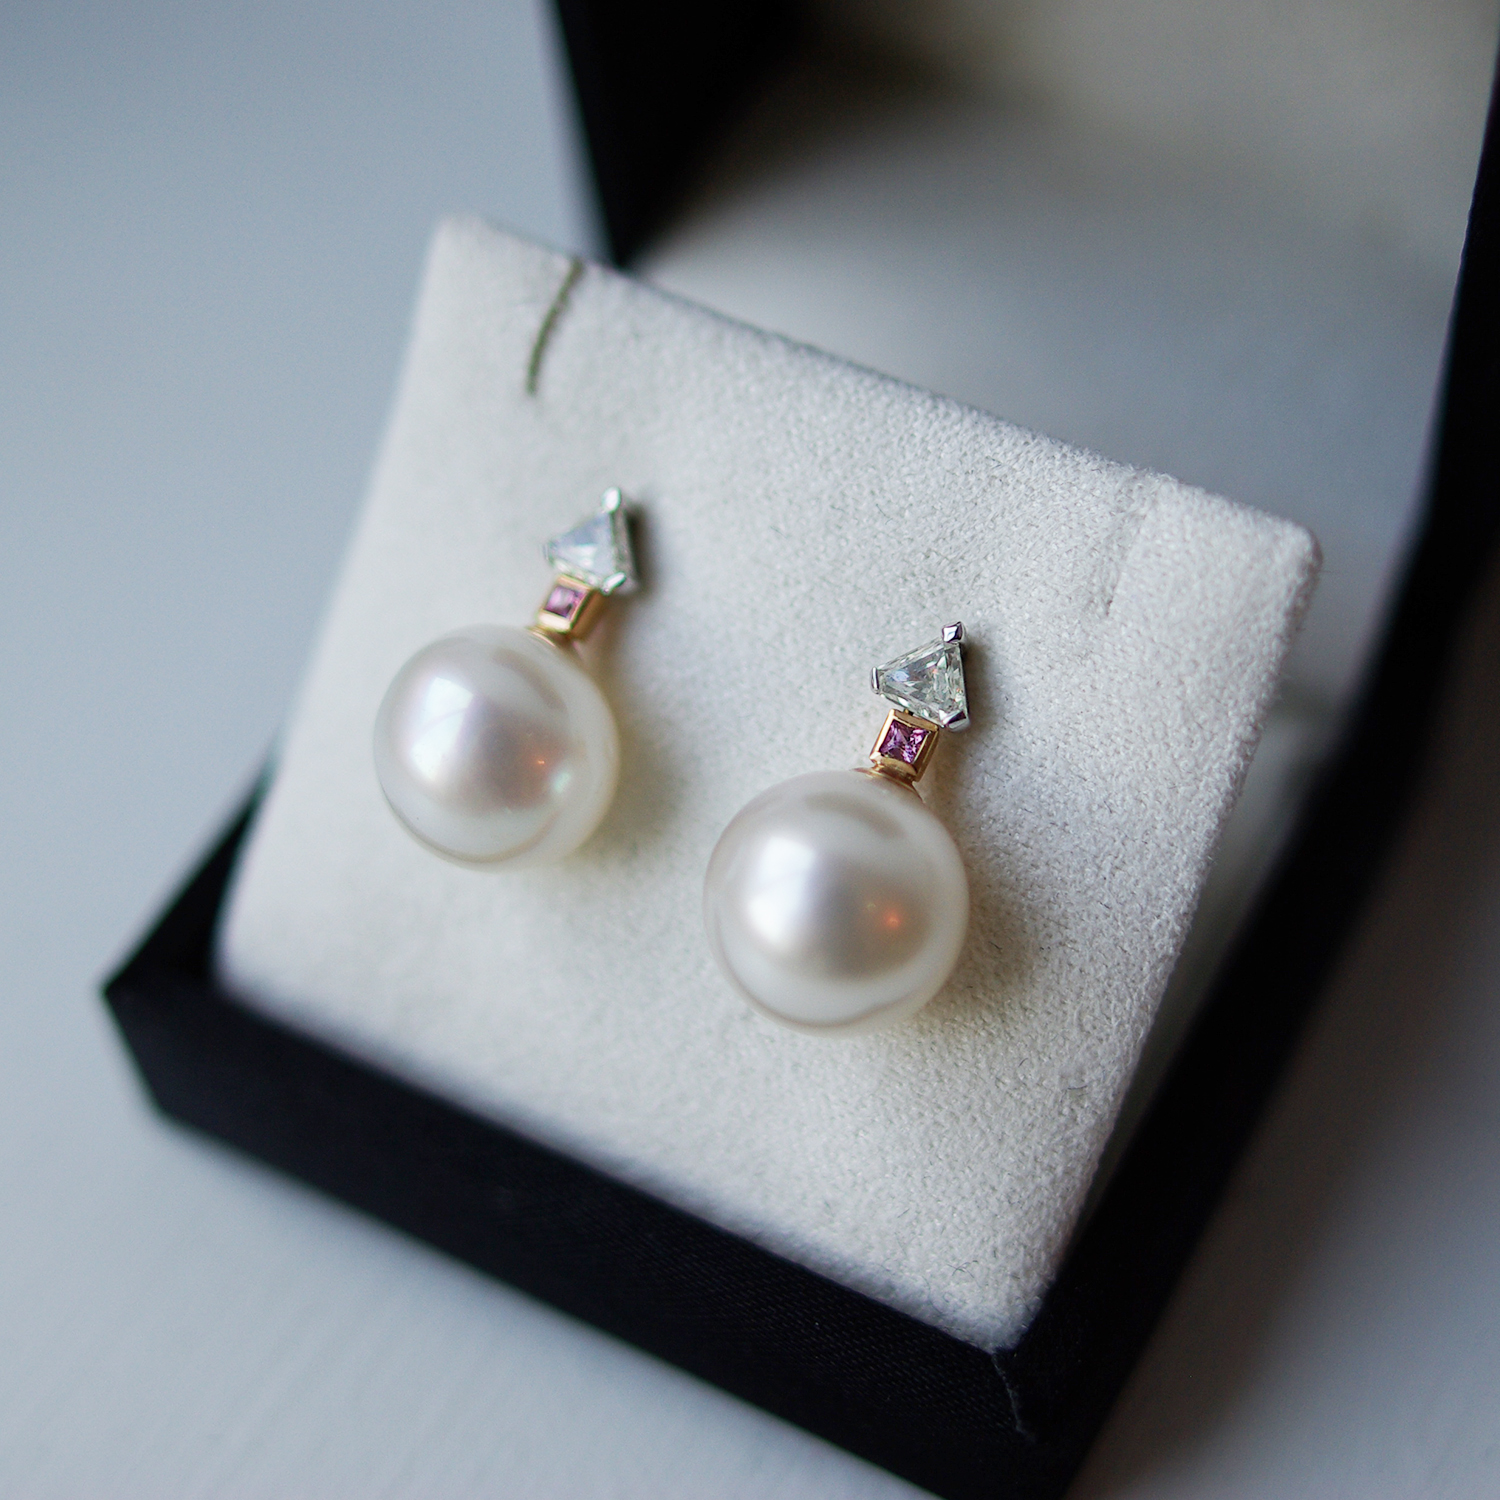 South Sea Pearl Earrings With Pink Sapphires And Trilliant Diamonds